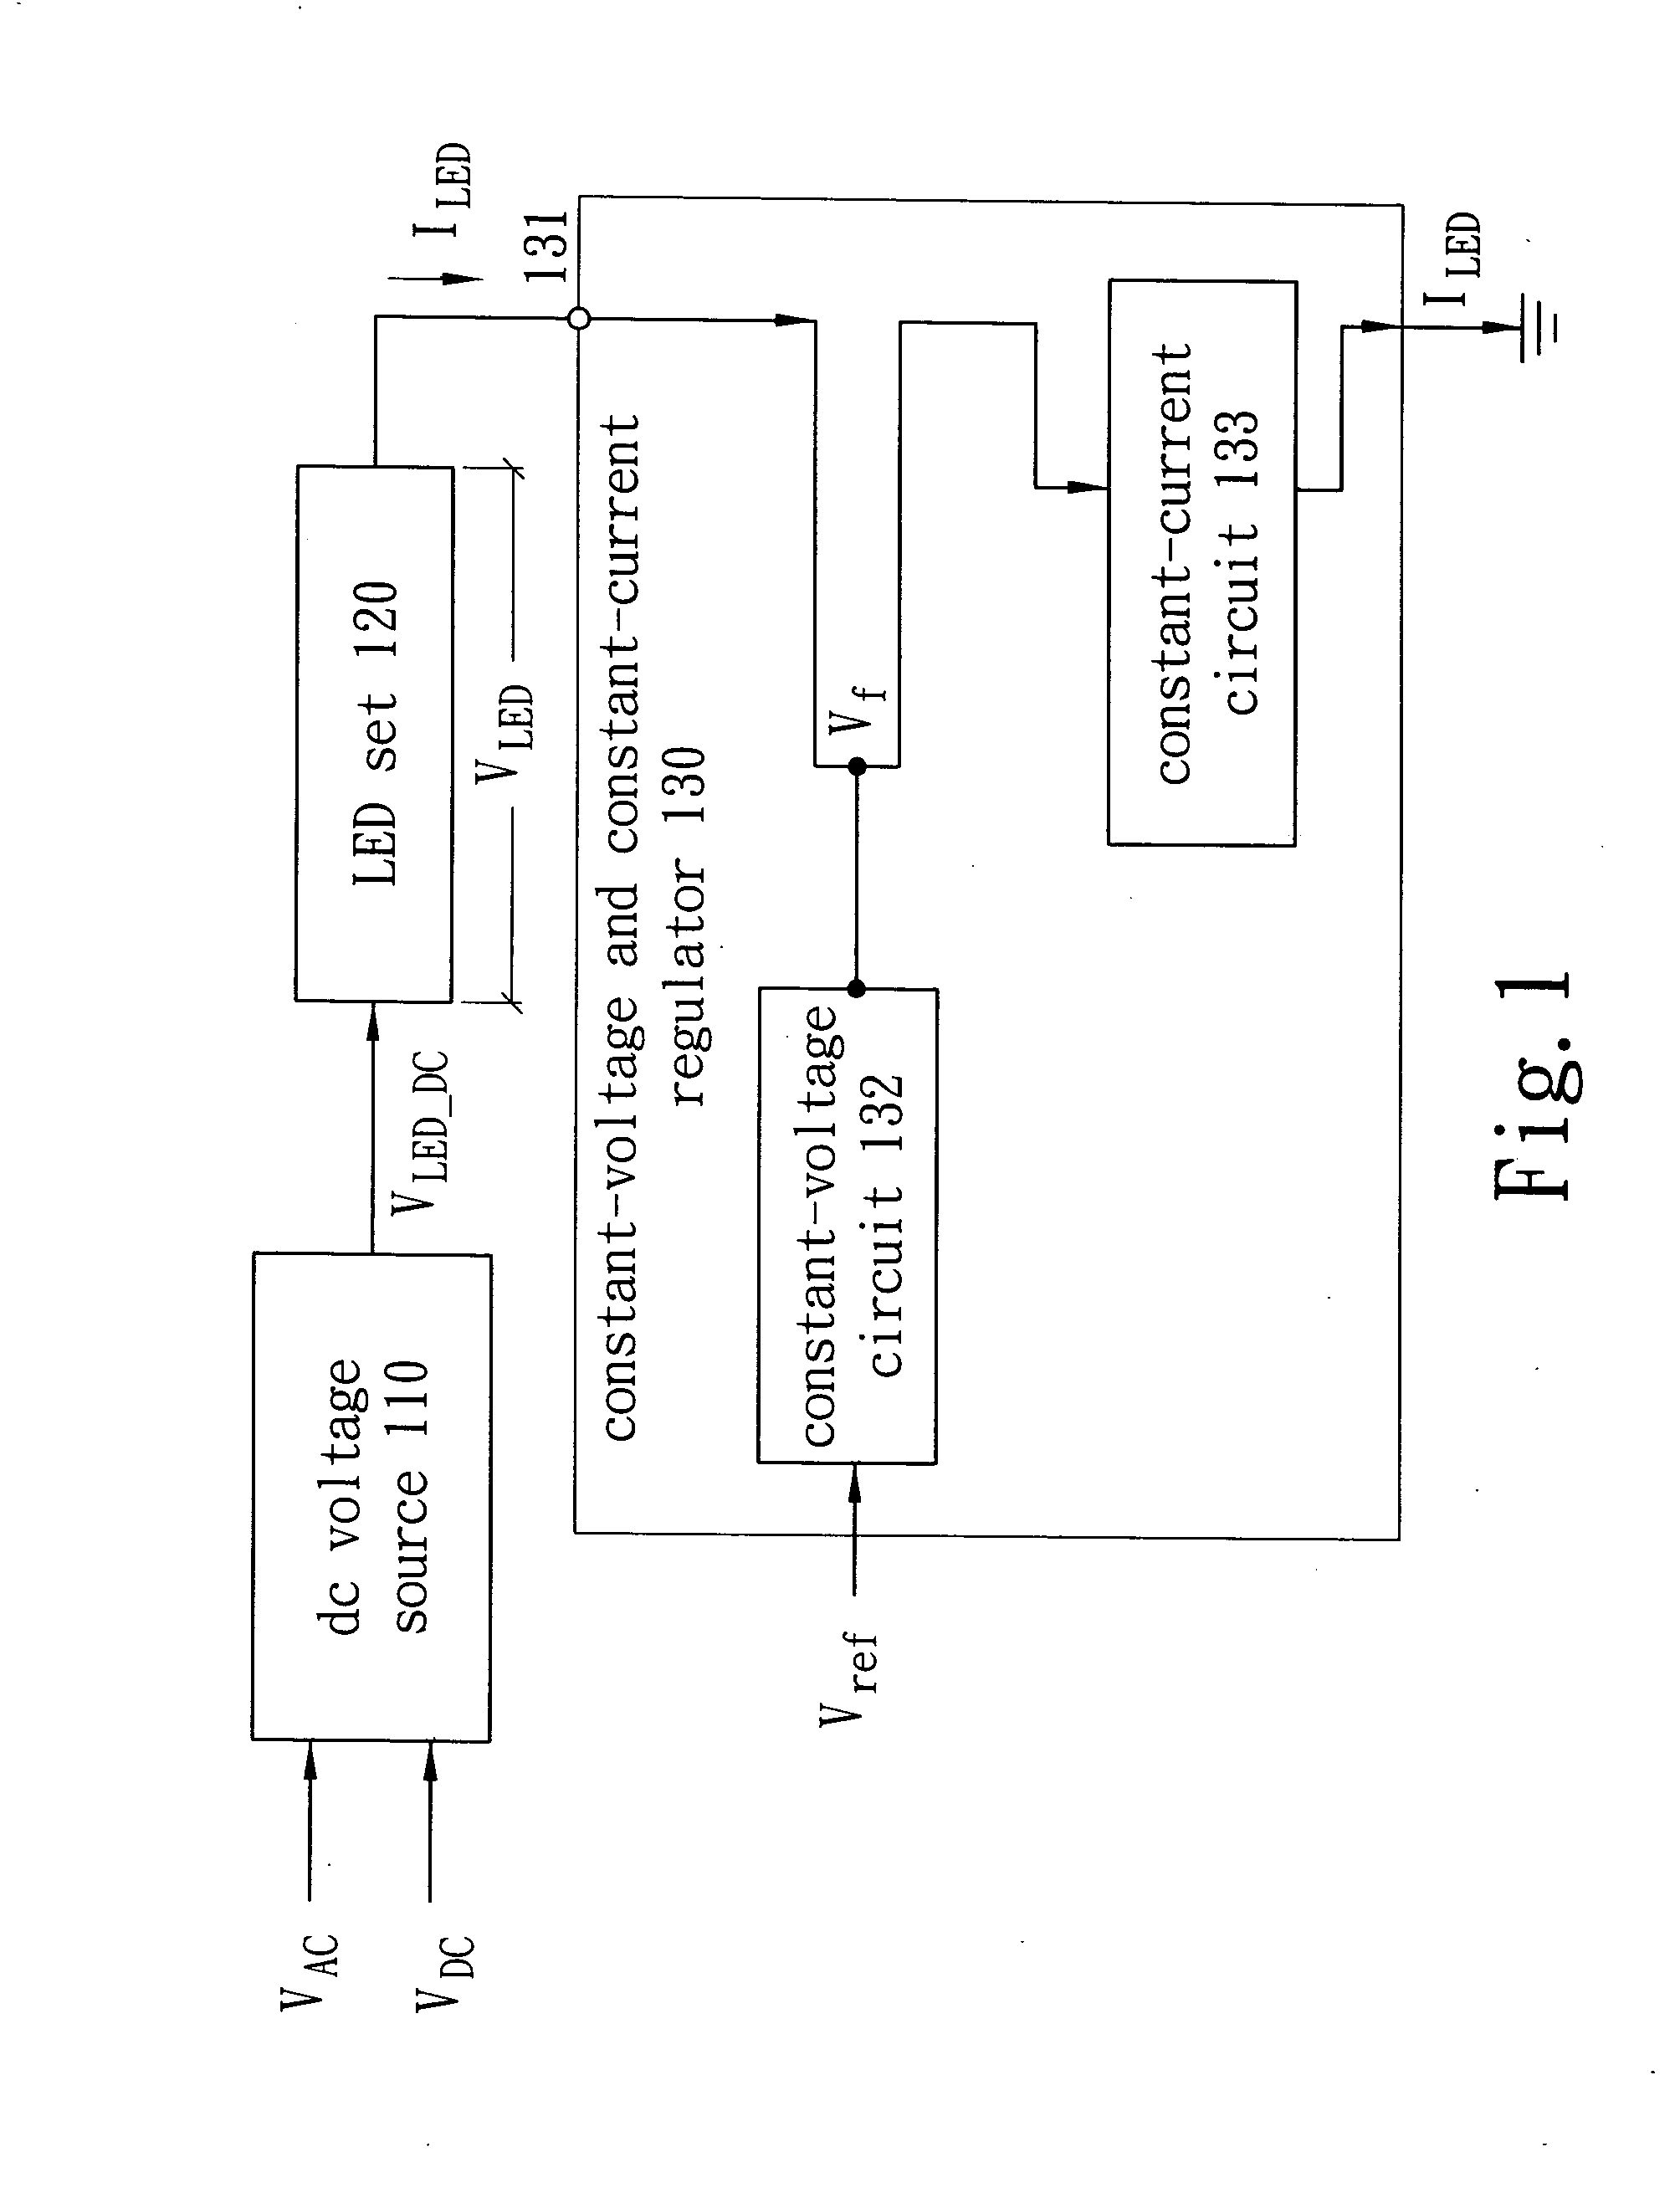 System and method for constant power LED driving and a redundancy dircuit thereof